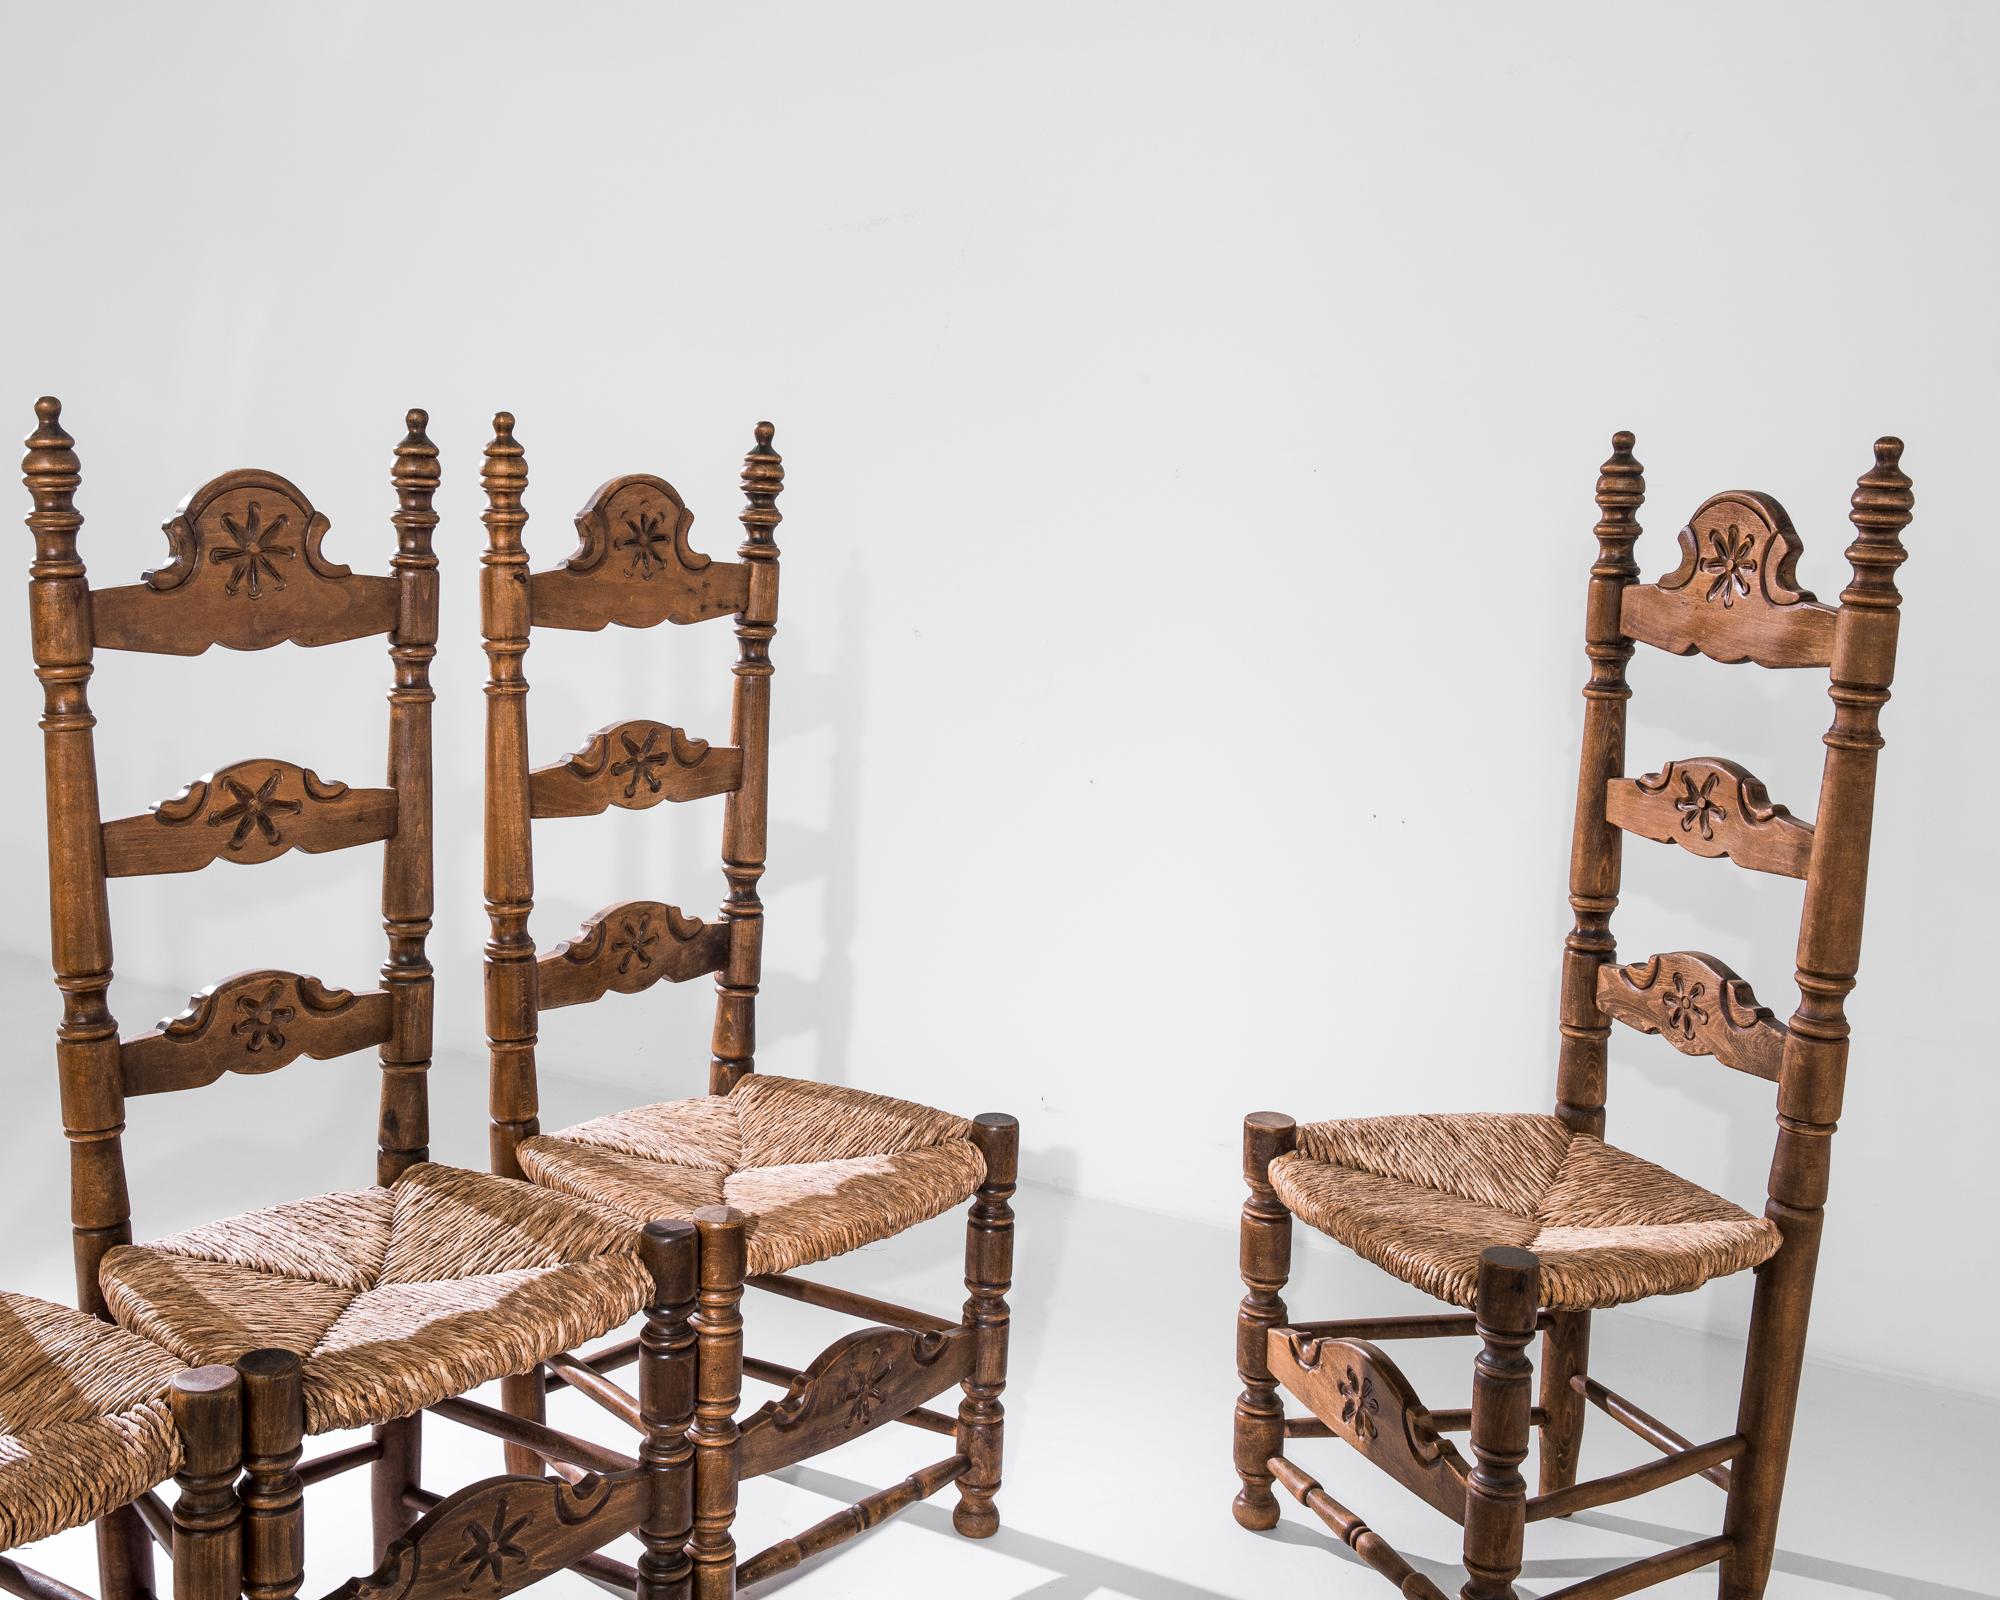 Crafted in Belgium circa 1960, this set of wooden dining chairs imparts the air of regal dignity. The chairs feature high backrests with finials, light-toned wicker seats and skilfully carved baluster legs. The adorable flower motif echoed on